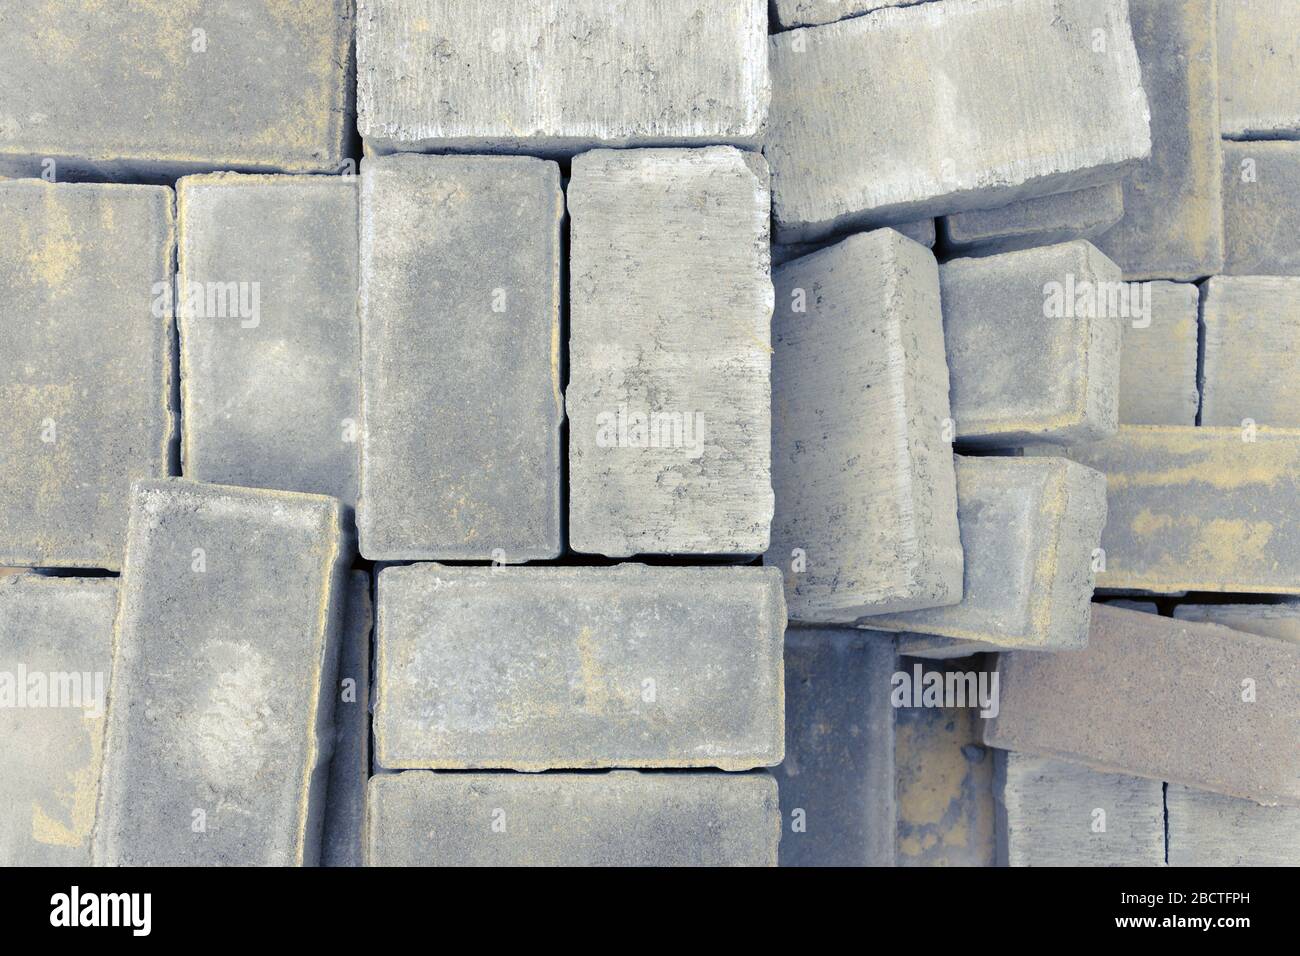 paving bricks lie on a pallet ready for construction work on laying paving slabs on the road or sidewalk Stock Photo